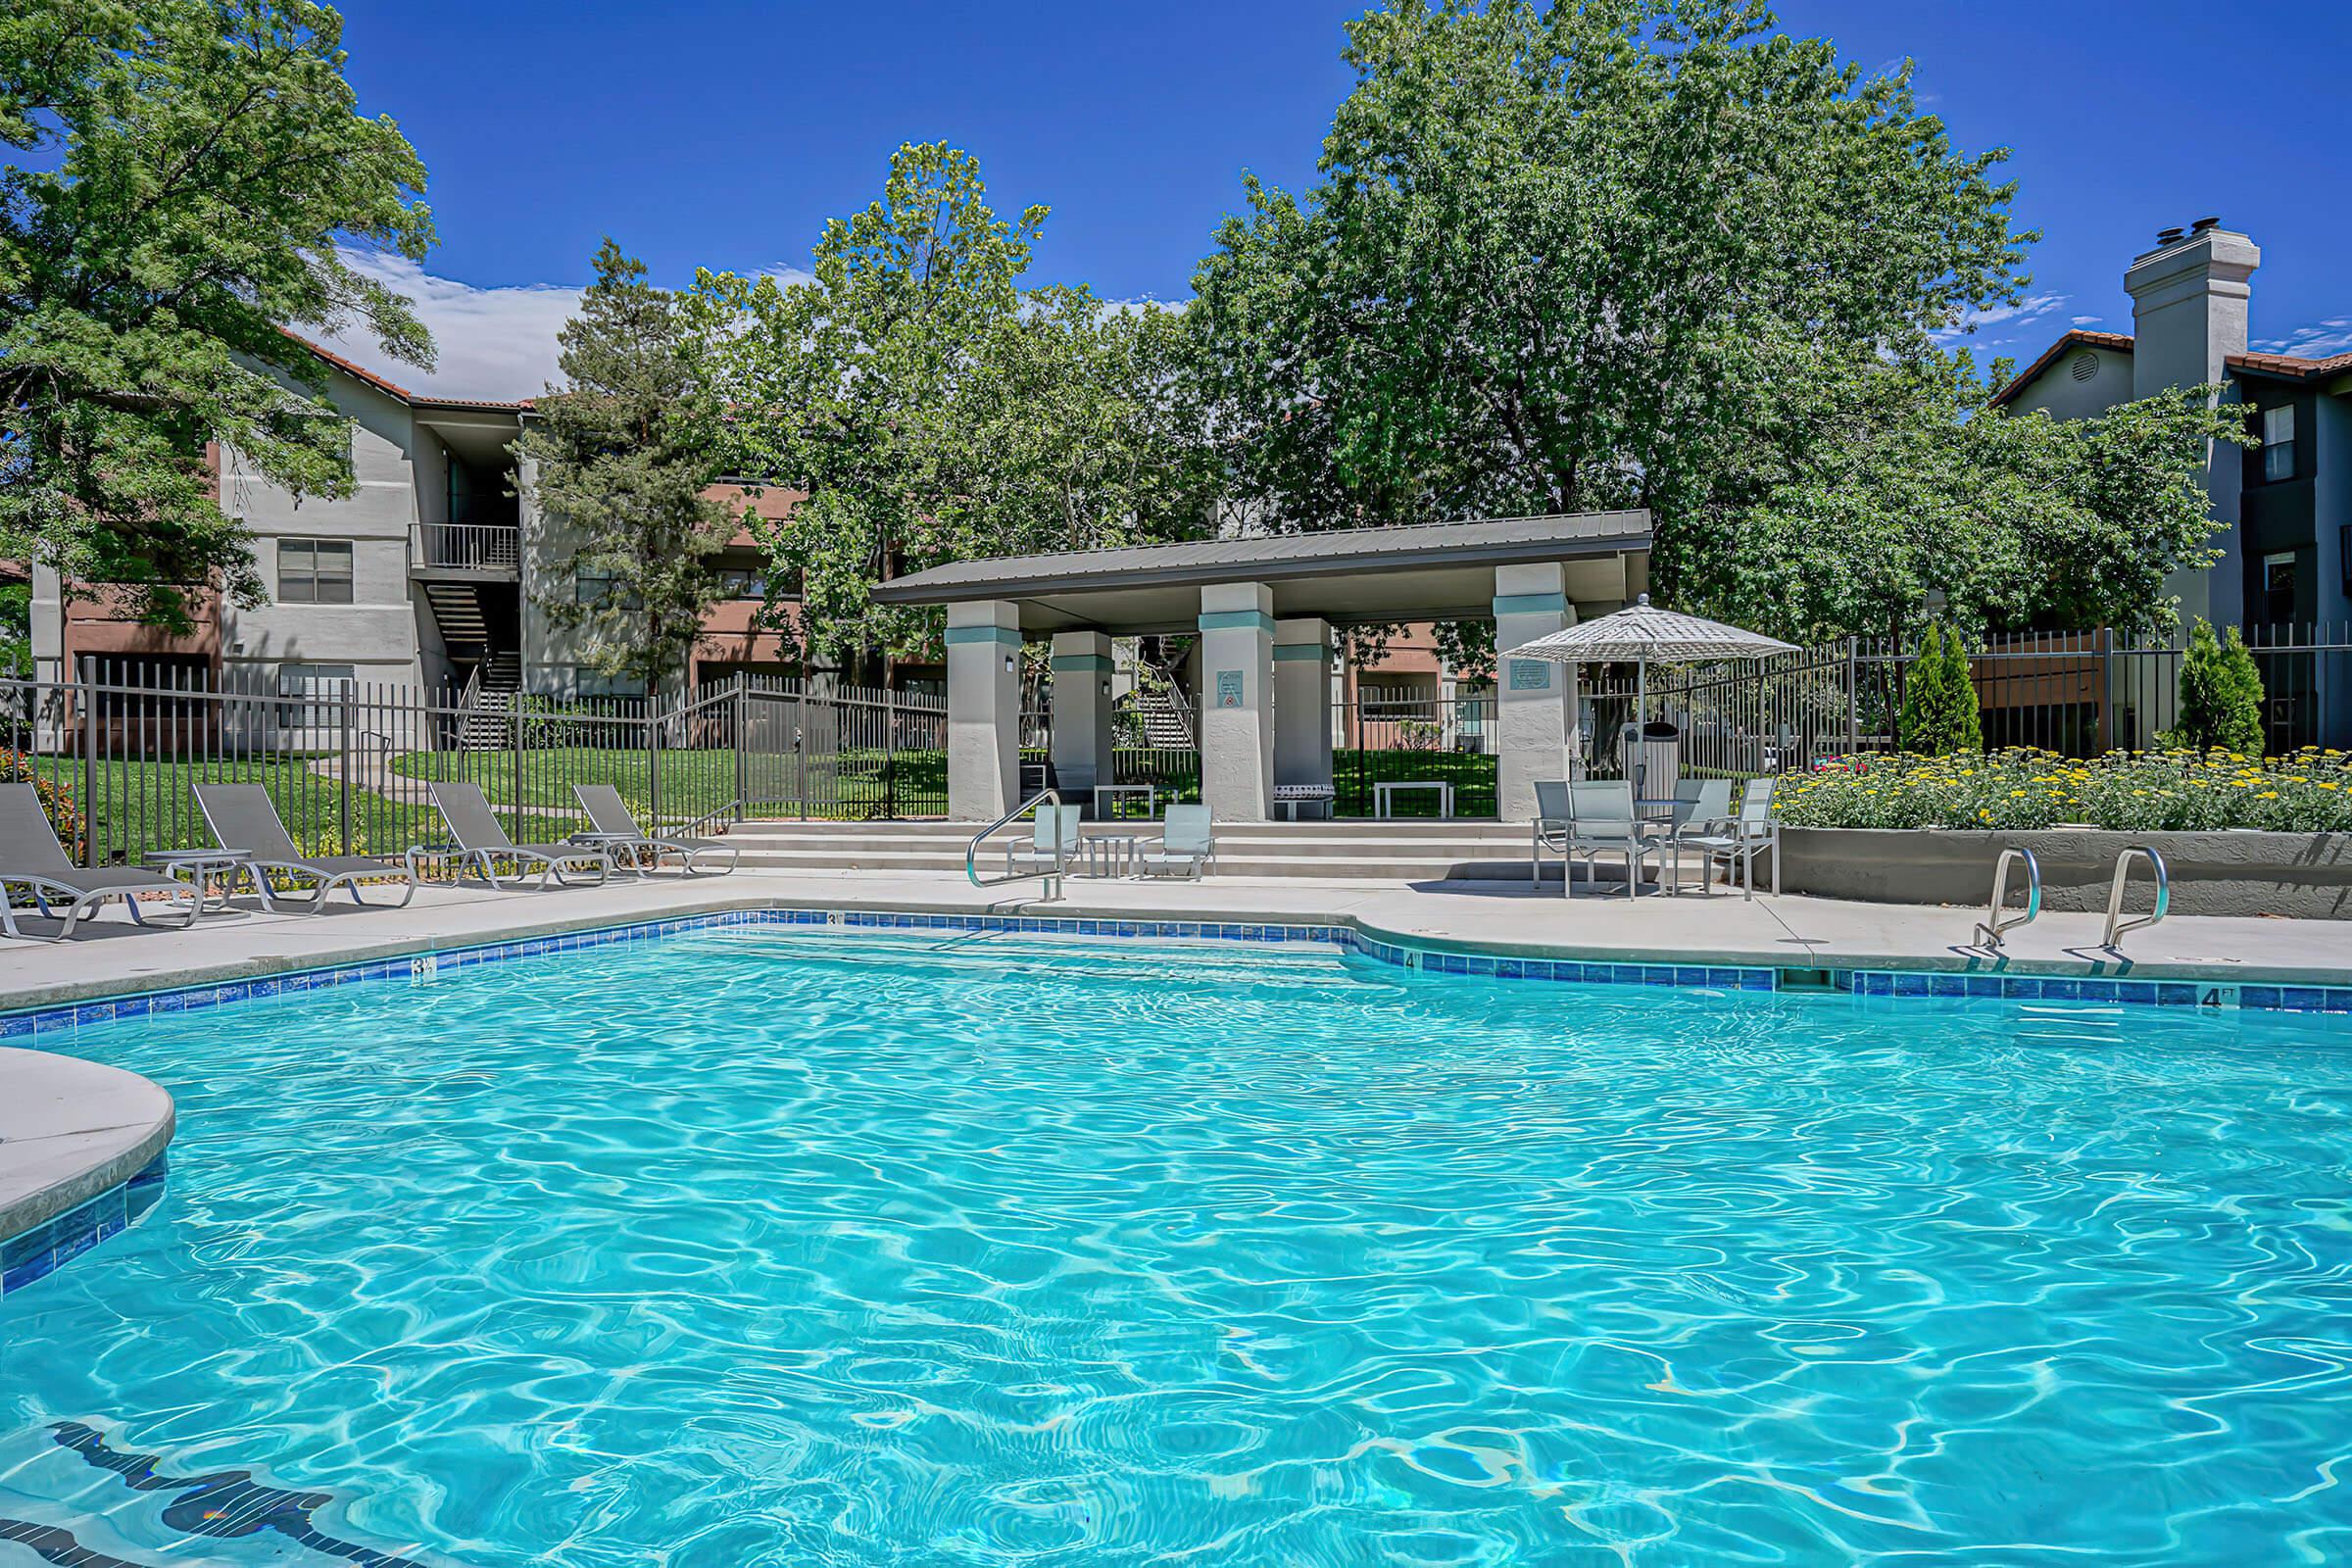 Sparkling Pool and Lounge with Free Wifi  - The Overlook Apartments, Albuquerque New Mexico 